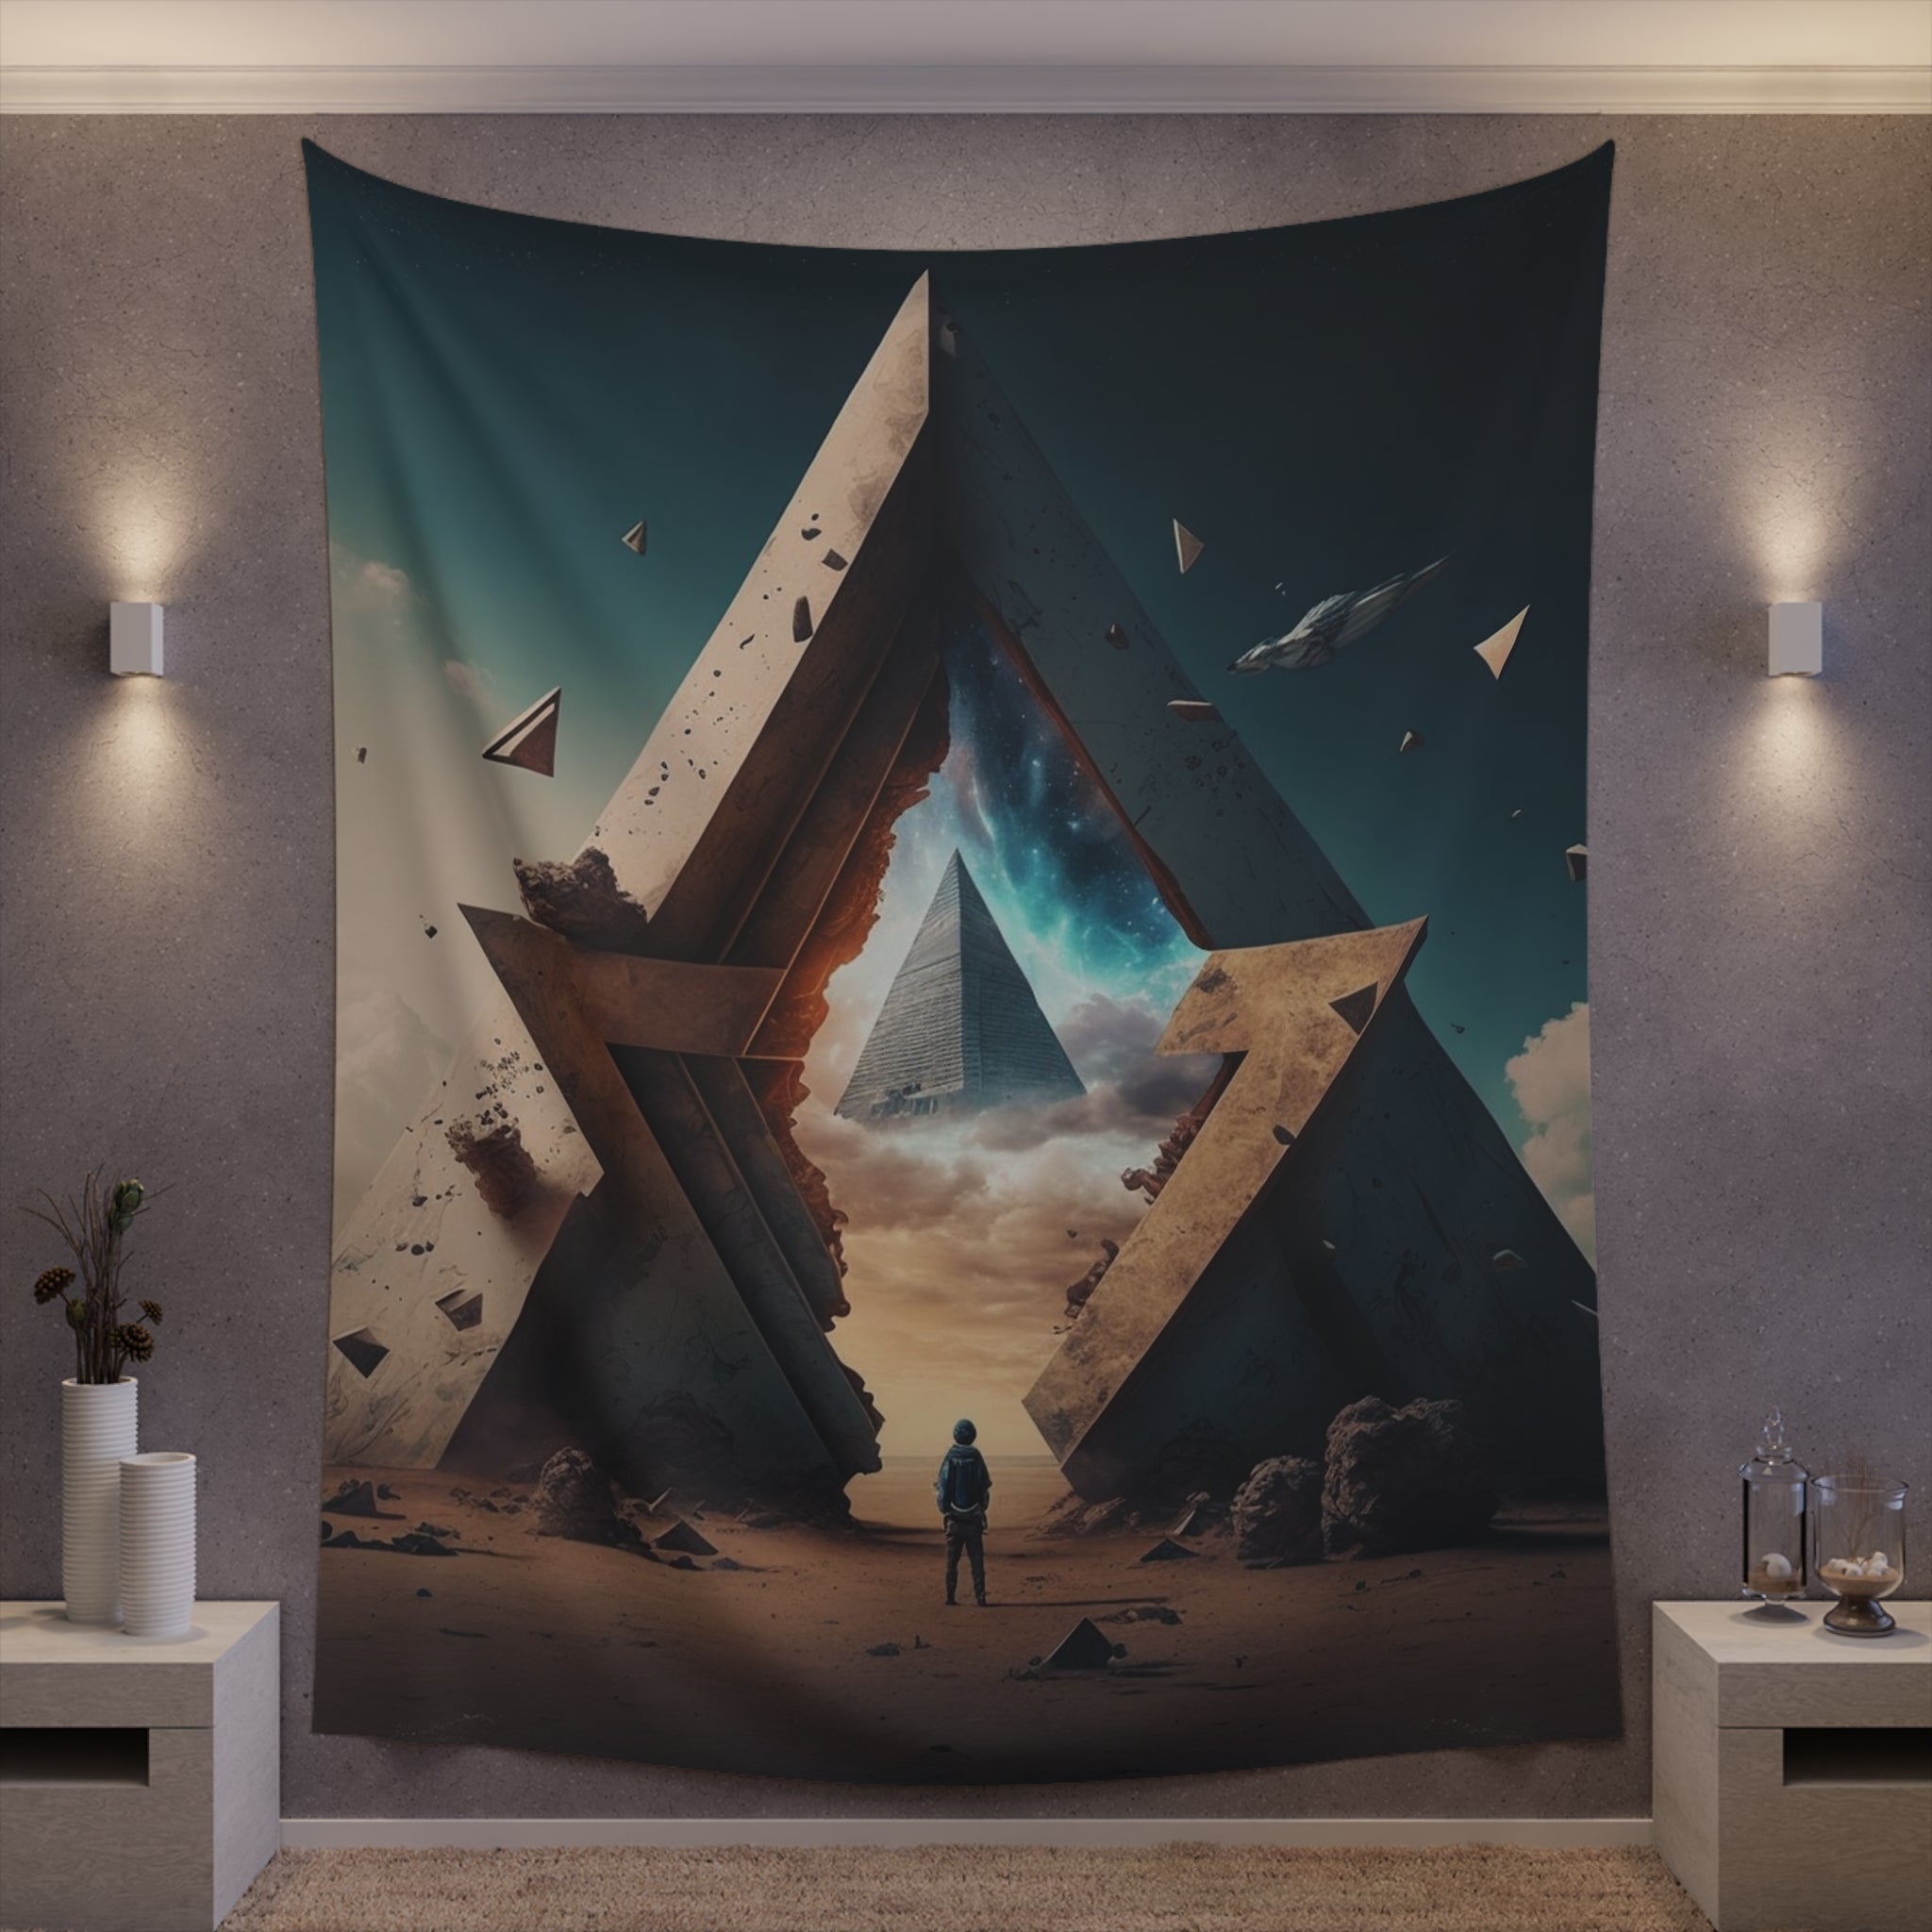 Portal Pyramid Ascension Egyptian Star Gate Printed Wall Tapestry Sci Fi Psychedelic Tapestries